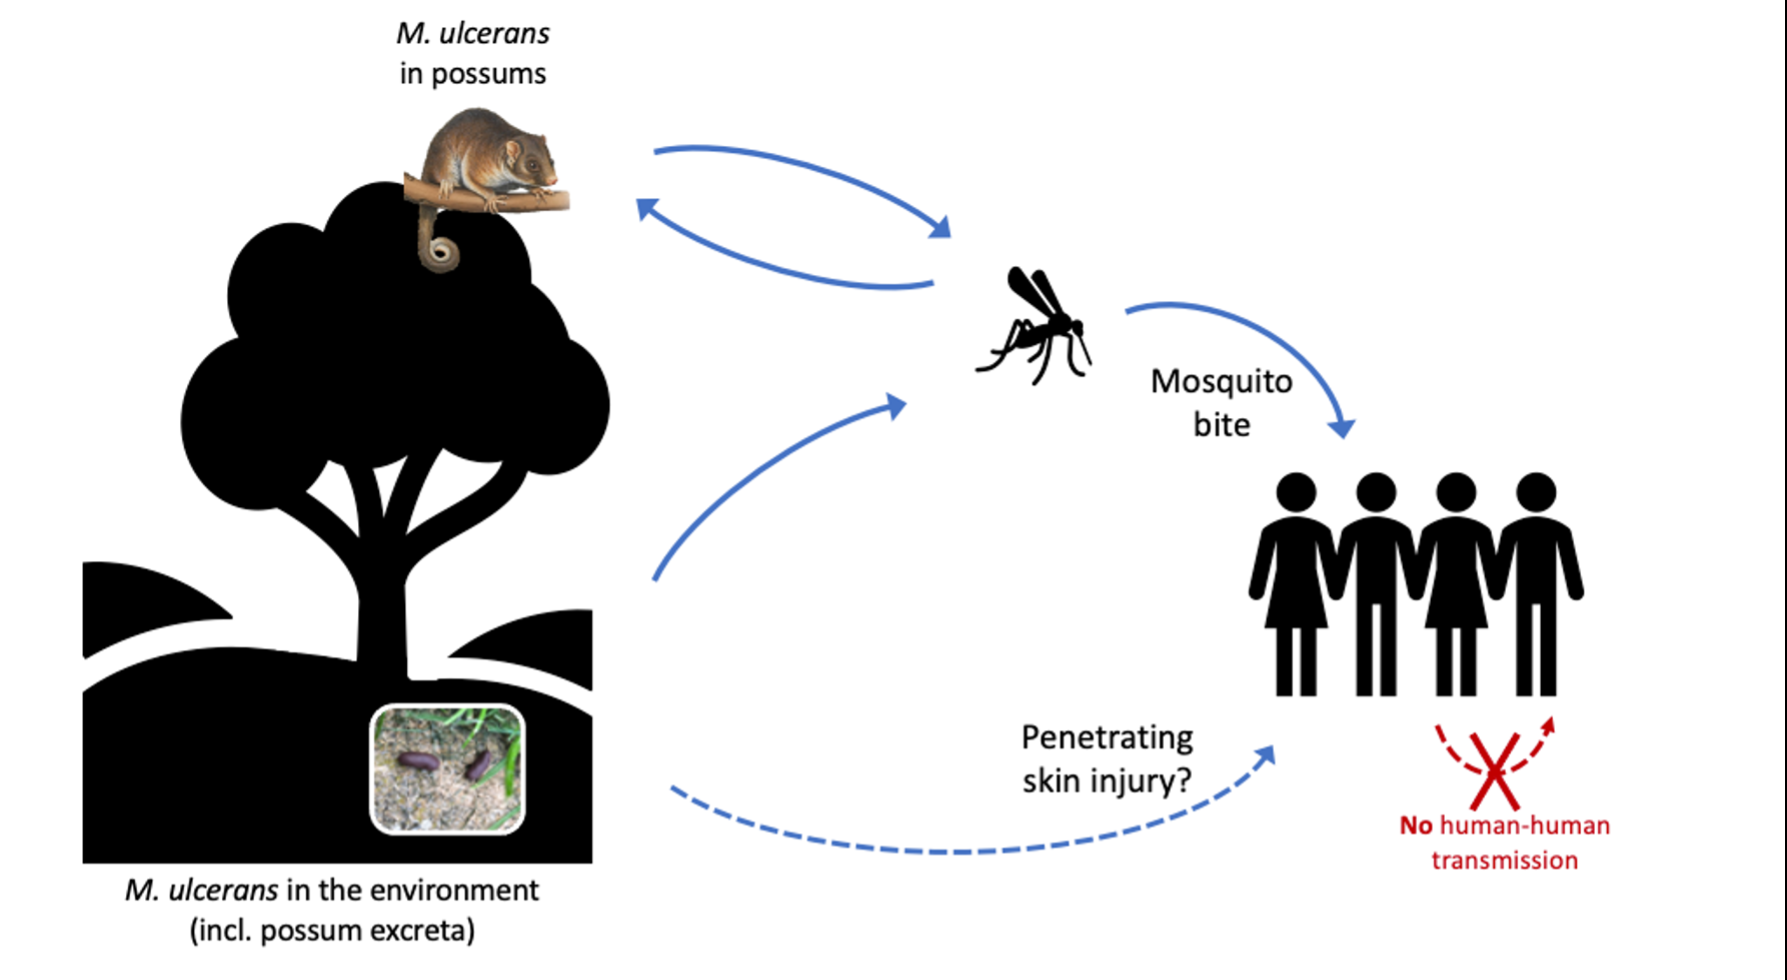 Figure: While some aspects of Buruli ulcer transmission in Victoria are not fully understood, there is increasing evidence that mosquitoes and possums play a role in a disease transmission.